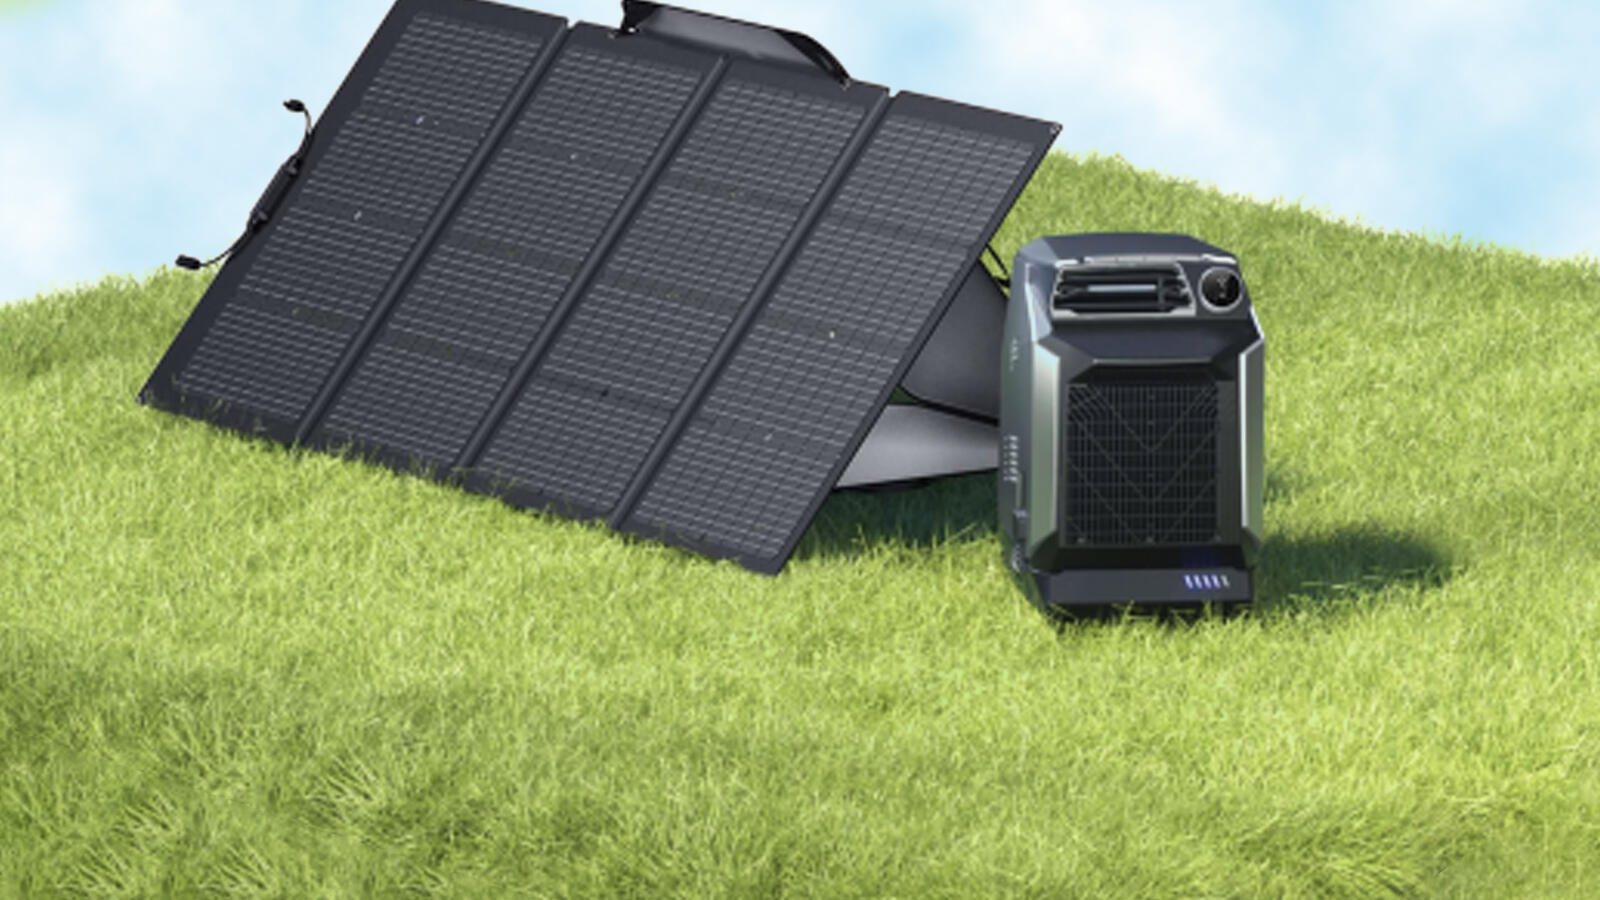 EcoFlow brings solar power to any home, even apartments and